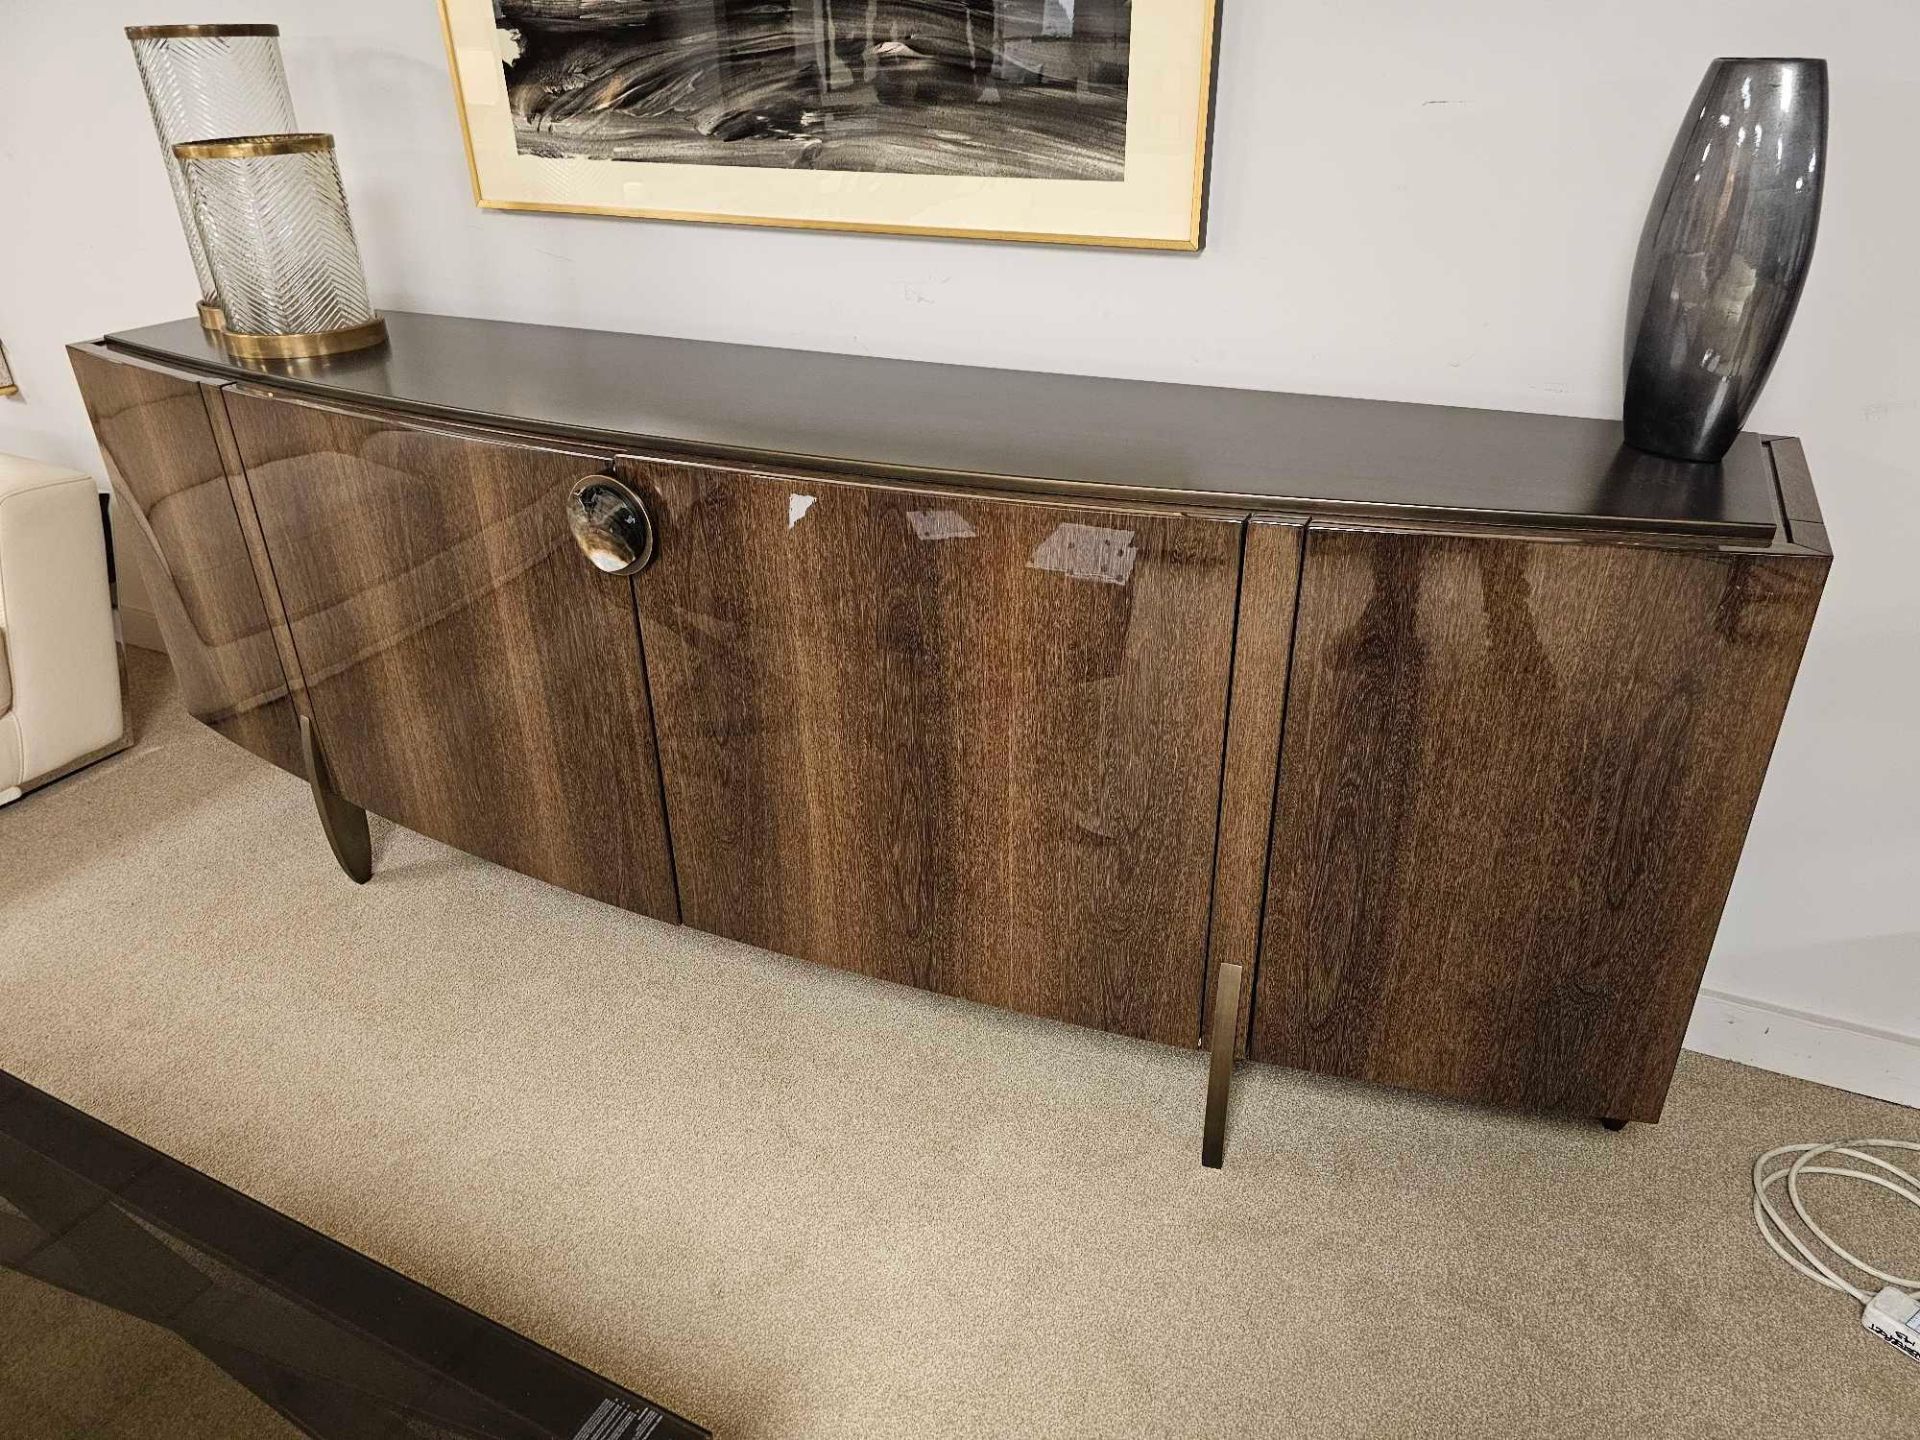 Fashion Affair Large Sideboard by Telemaco for Malerba The Buffet, for the living room, is shaped by - Image 19 of 25